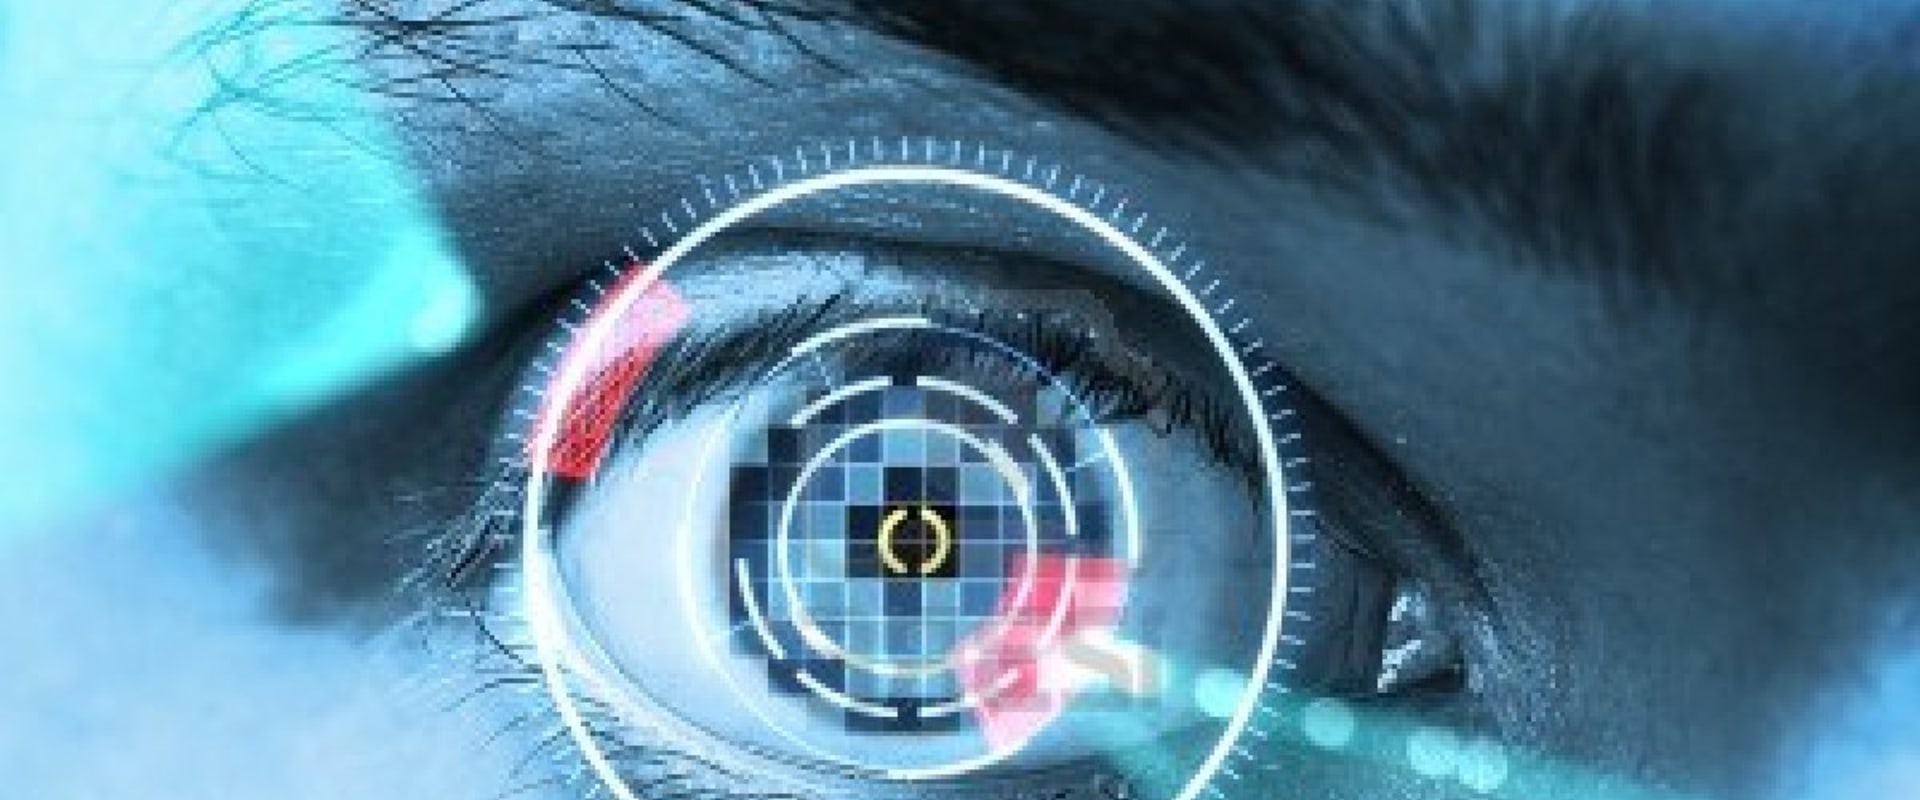 Understanding the Risk of Eye Damage from Lasers